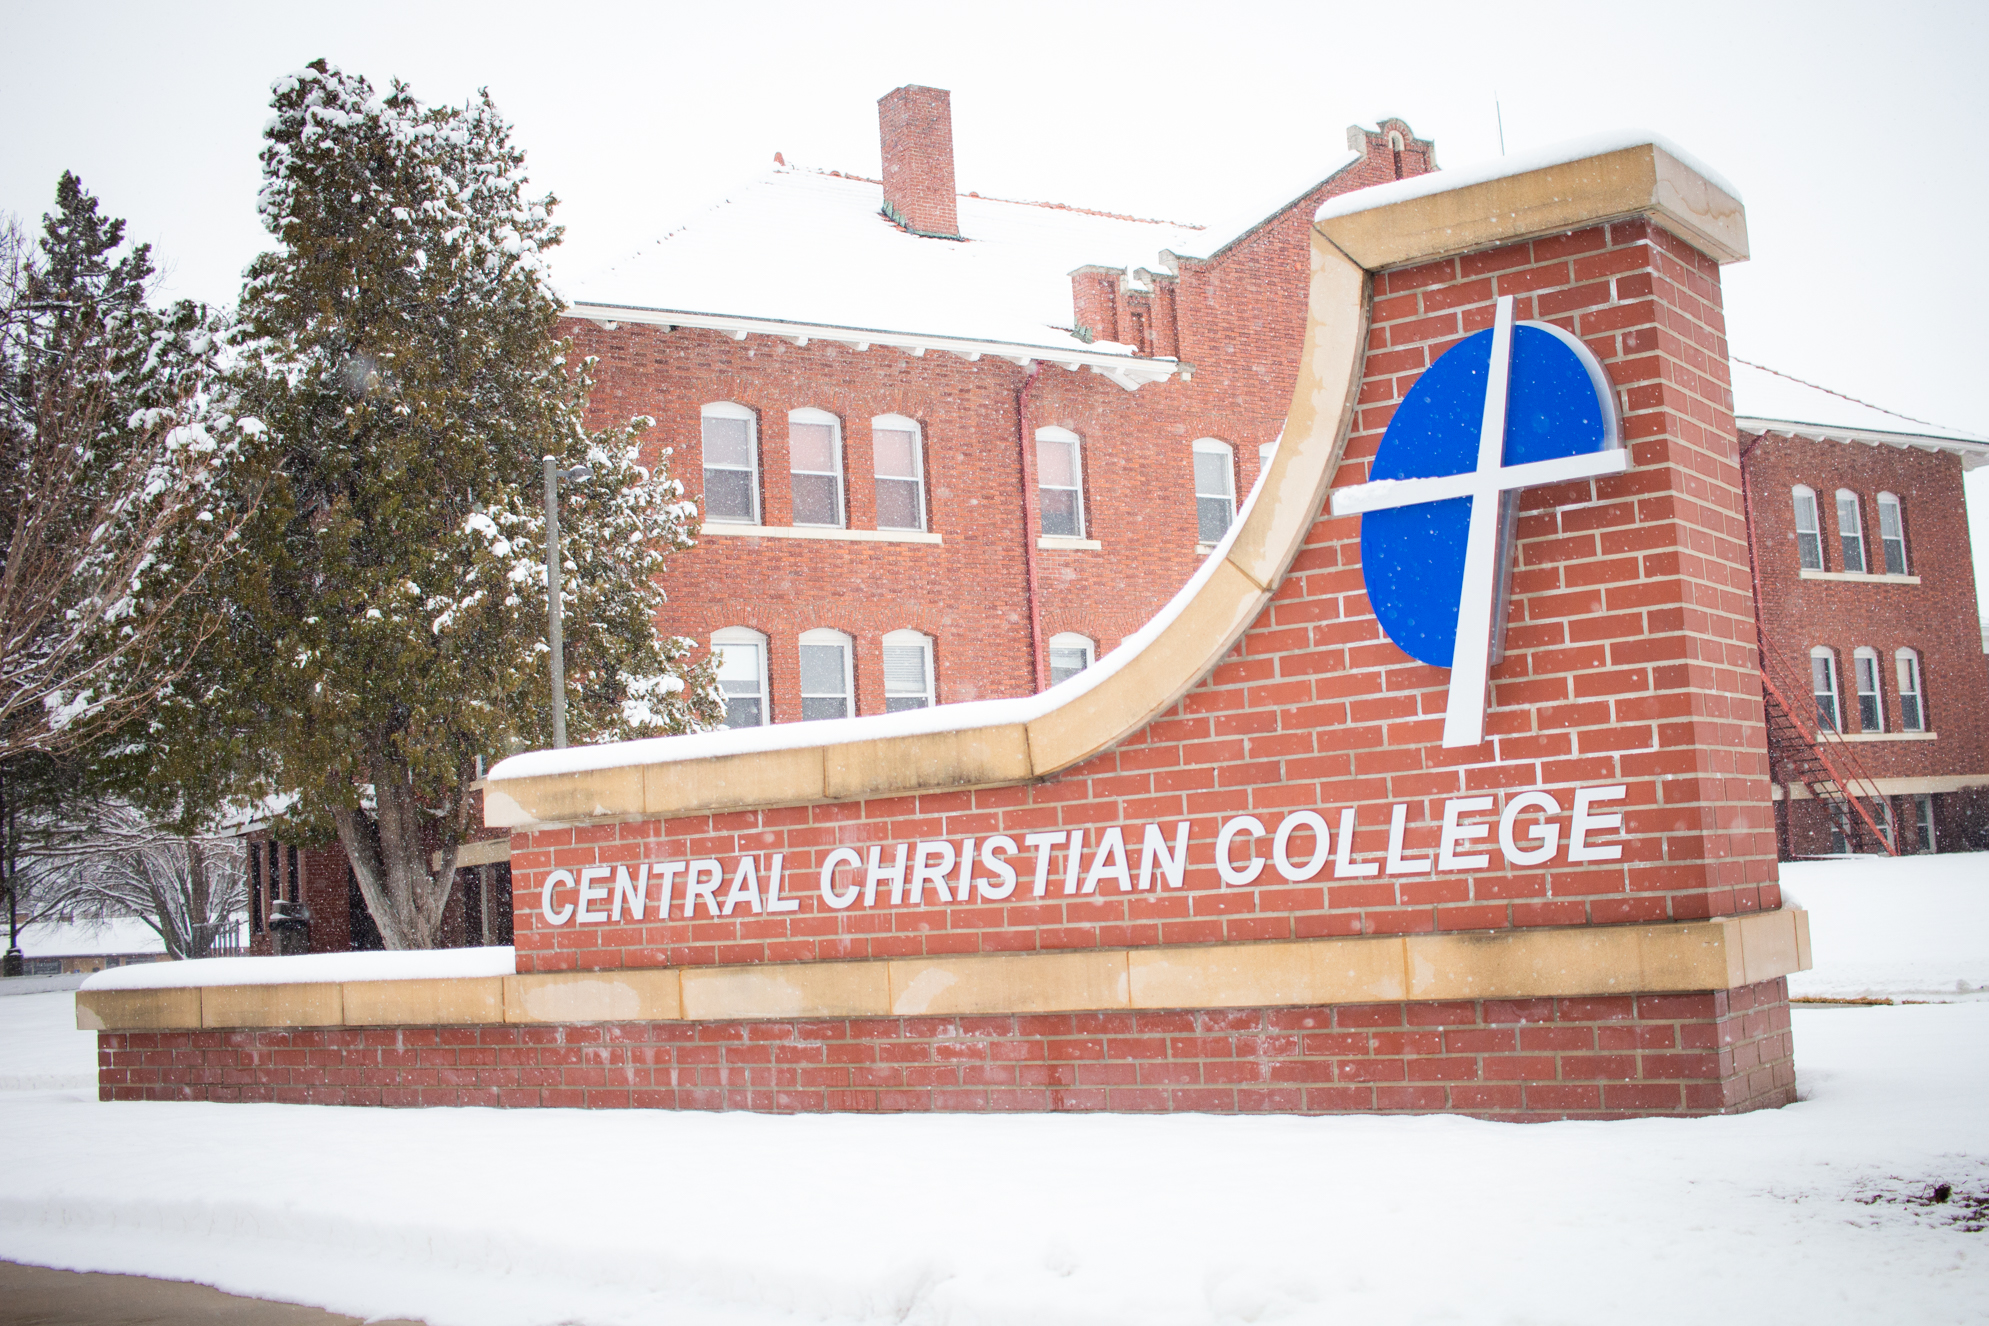 Central Christian College of Kansas in Snow